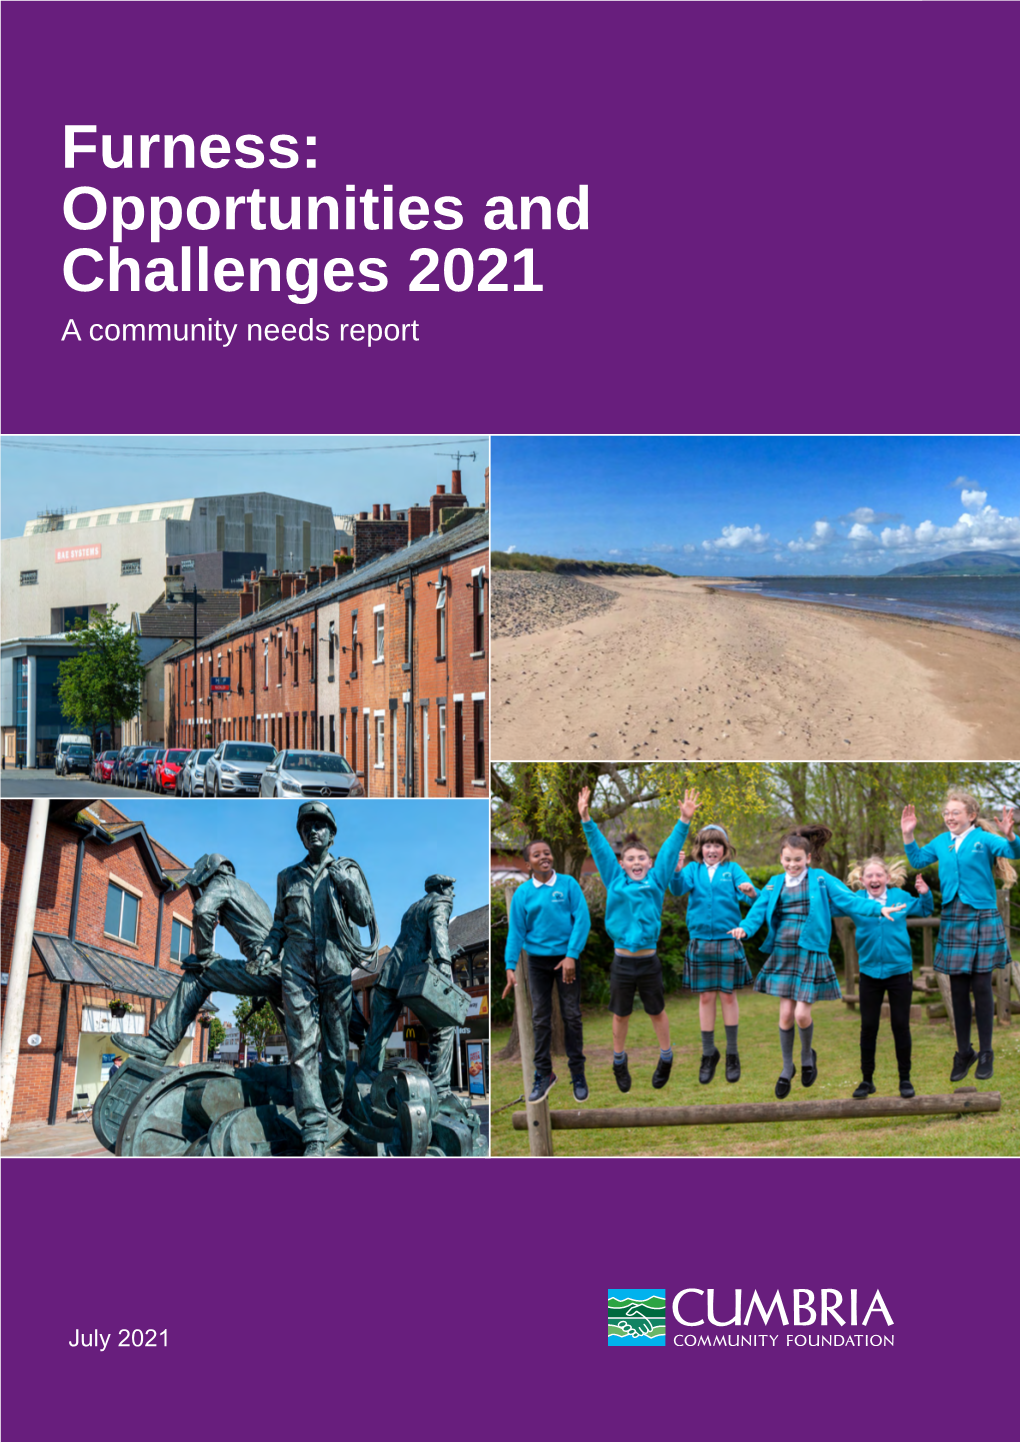 Furness: Opportunities and Challenges 2021 a Community Needs Report